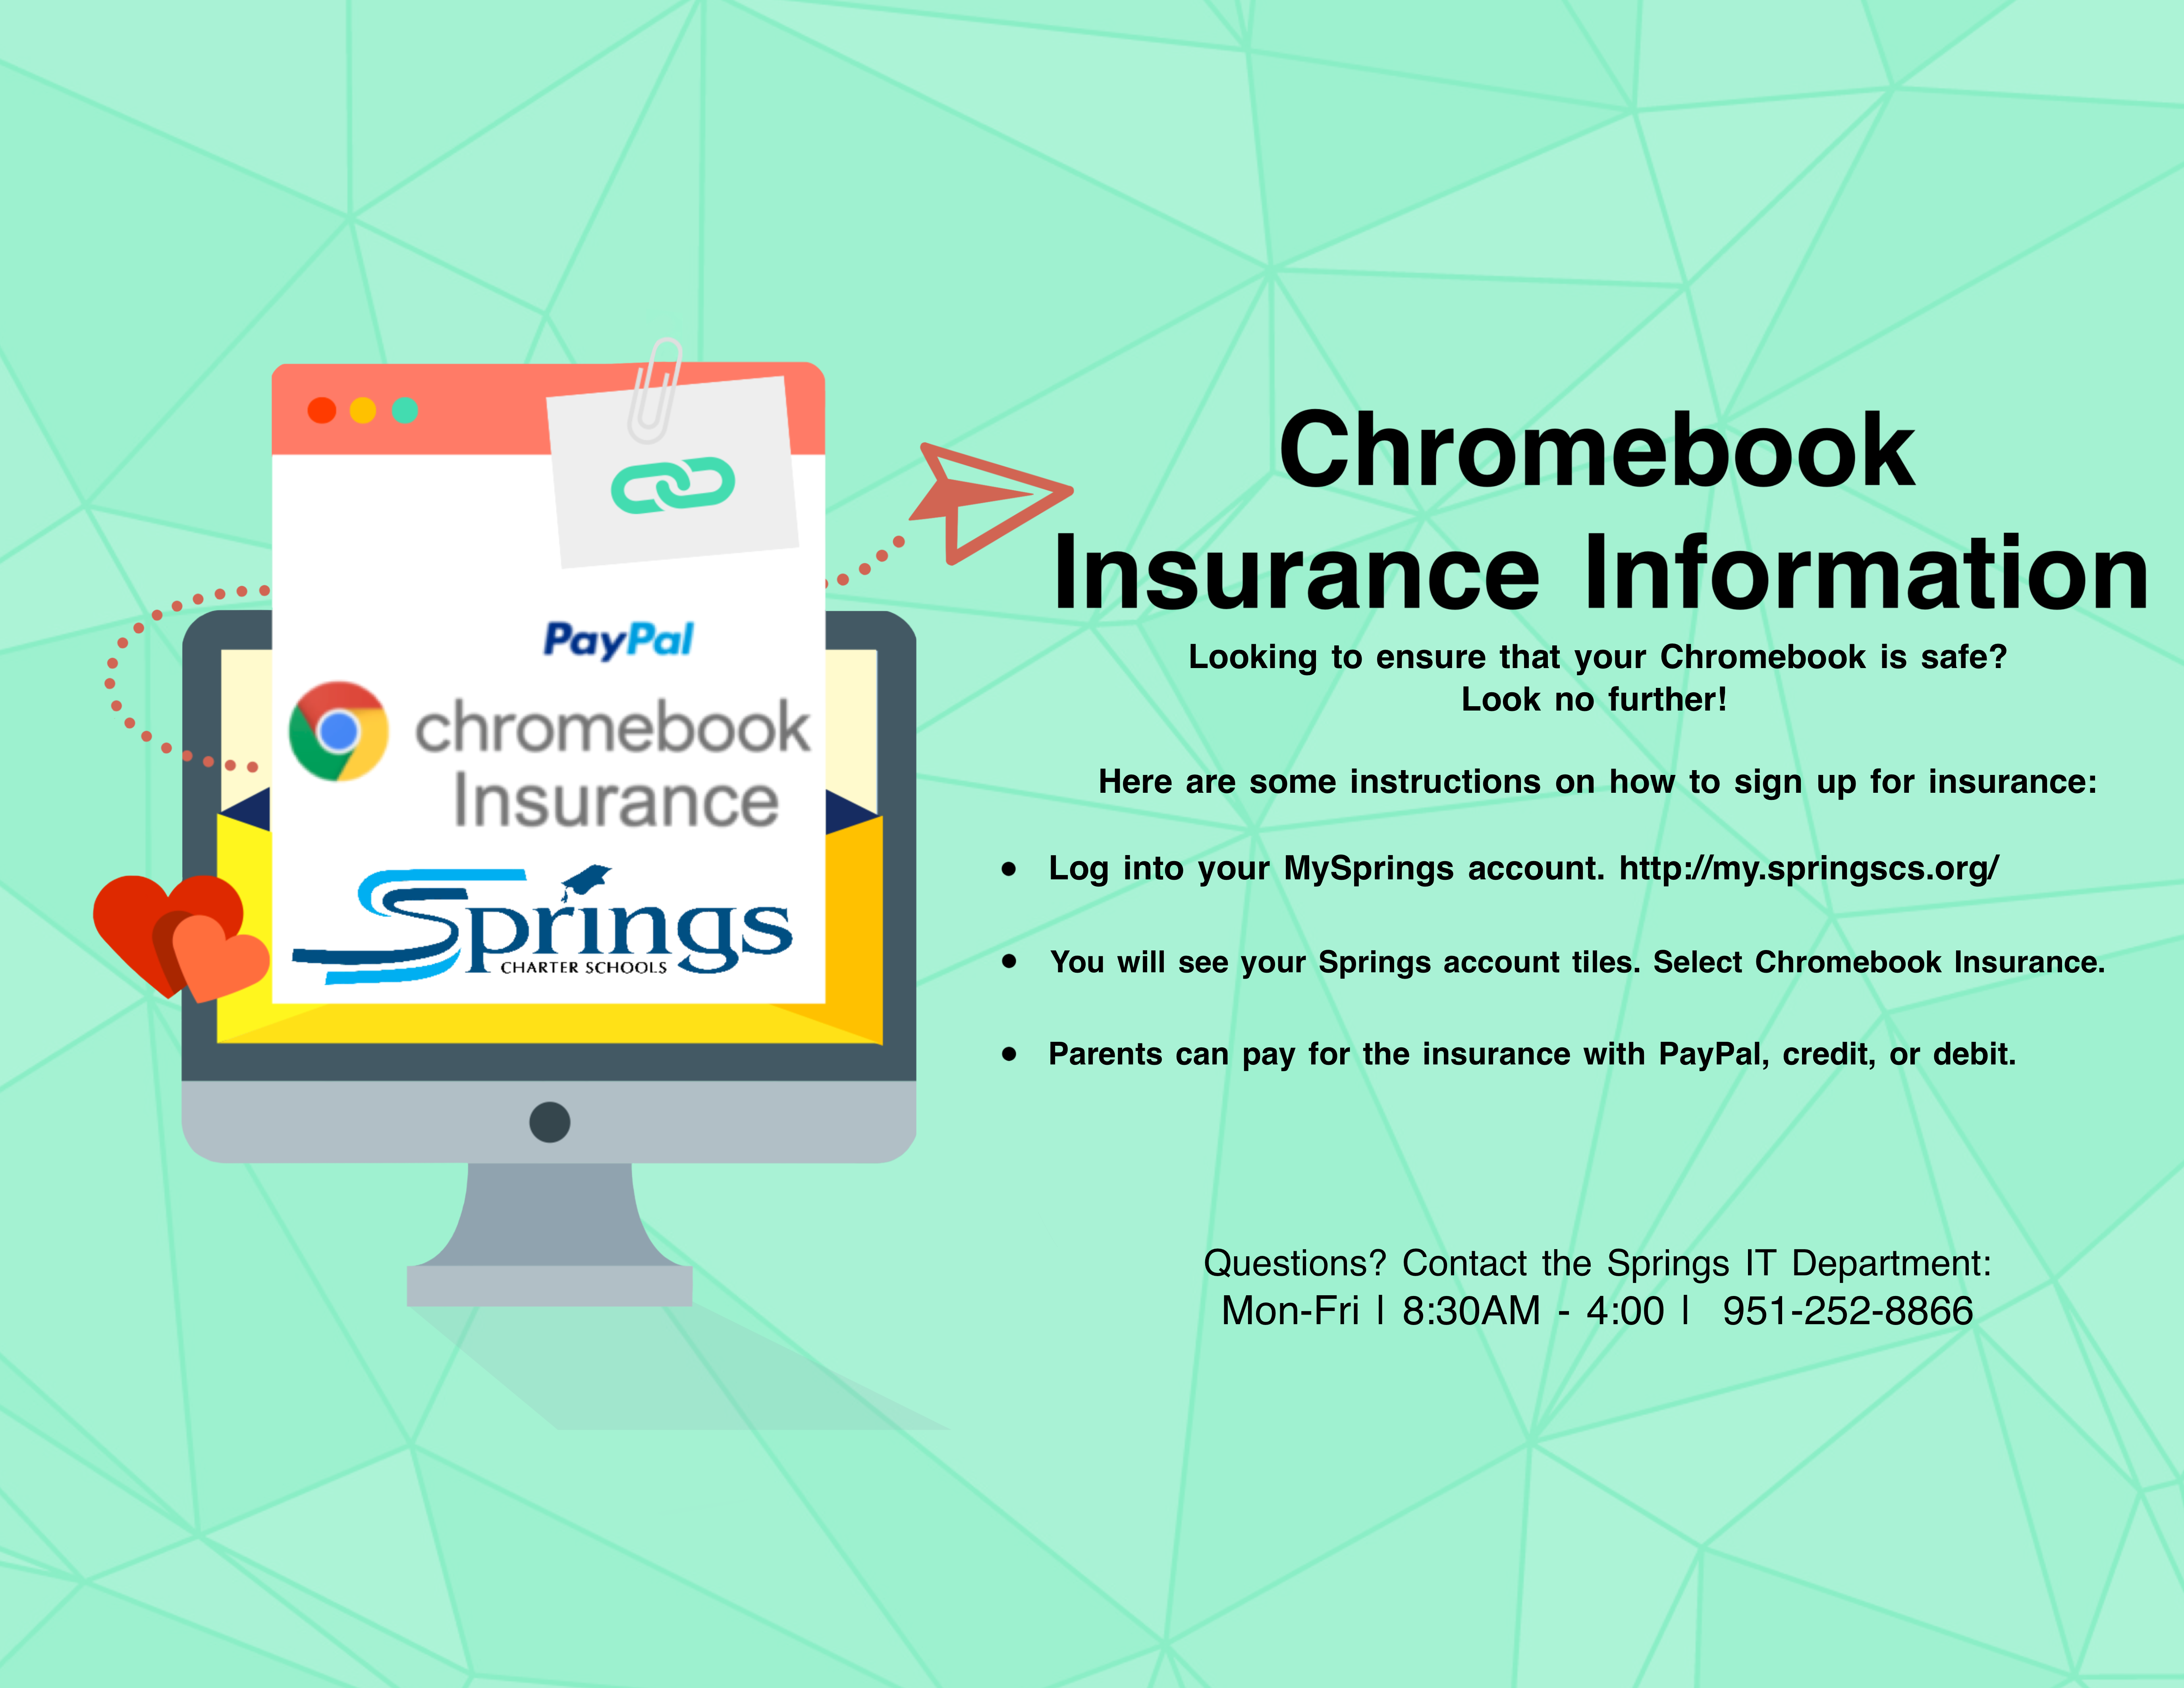 Chromebook Insurance Info 2023(Correct).png